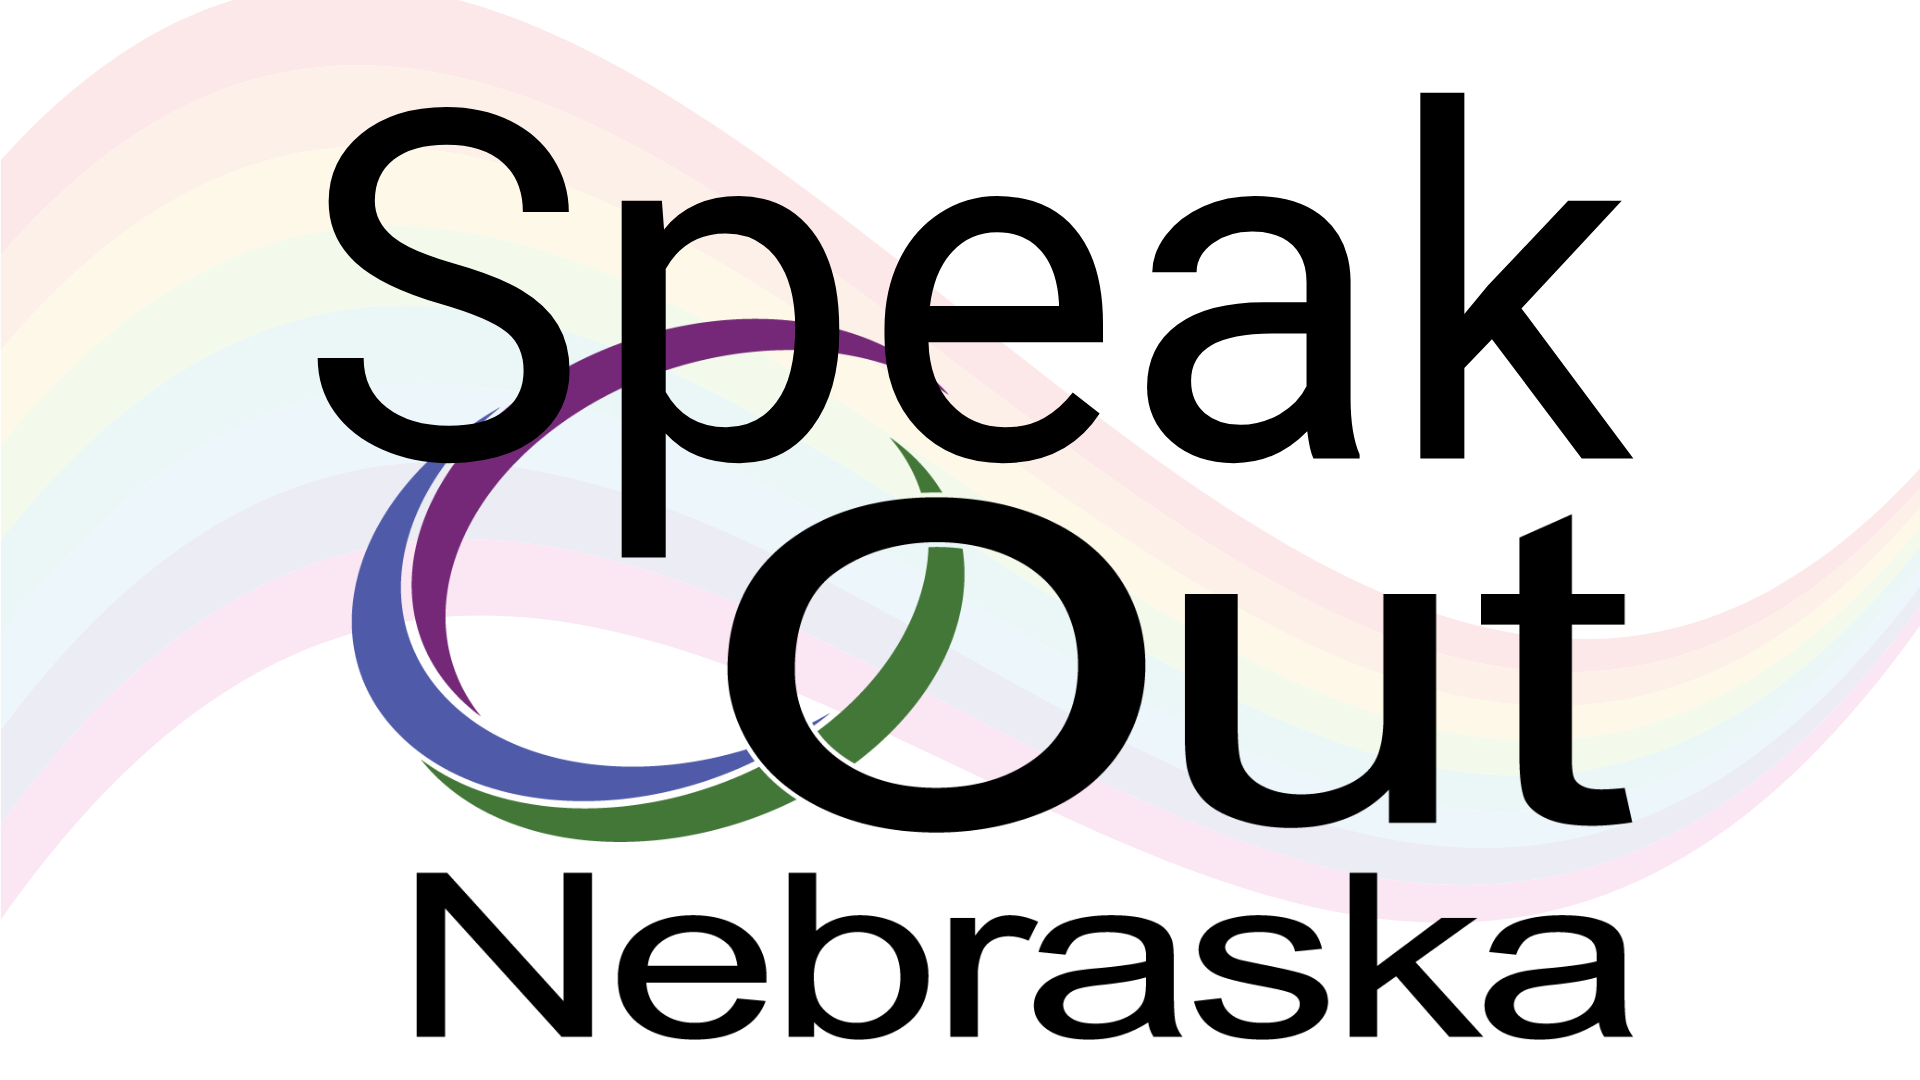 Black text reads "Speak Out Nebraska". There is a light rainbow swoosh behind the words.